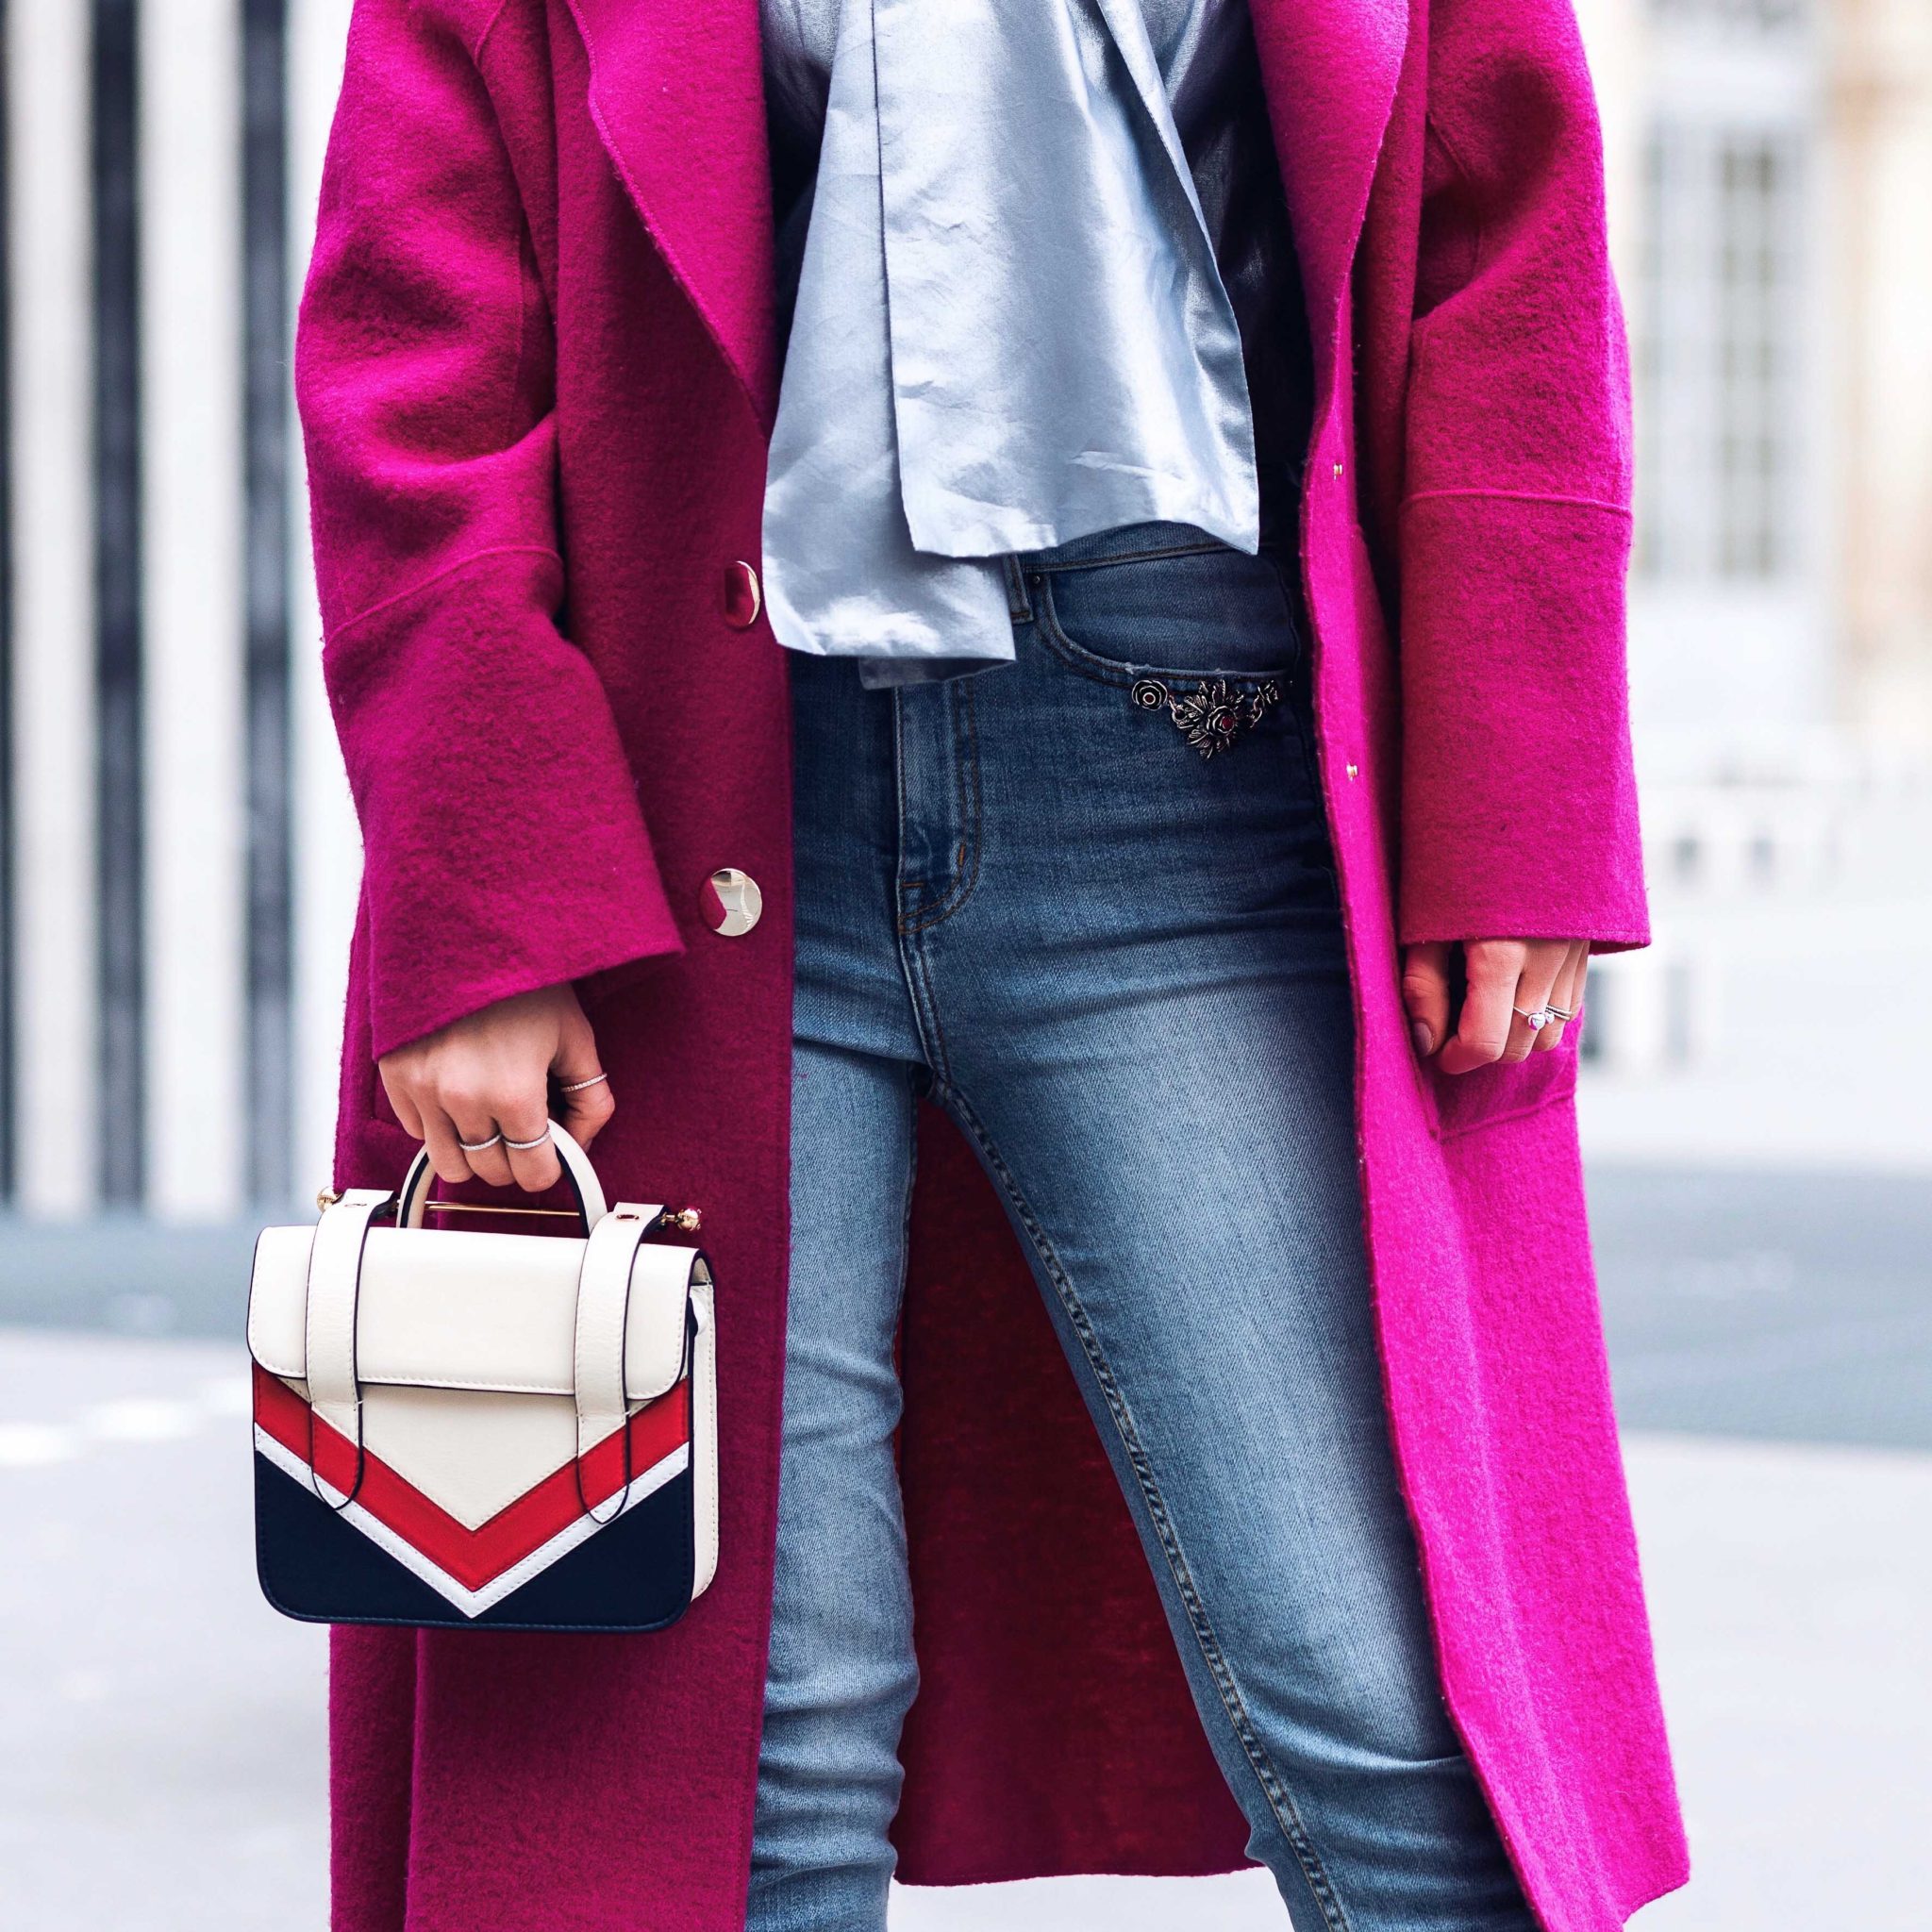 Best Street Style Paris Fashion Week Mars 2018 of Julia Comil / French Fashion Blogger in Los Angeles - Outfit for John Galliano Fall Winter 2018 2019 show - Pink Tara Jarmon Coat and Blouse - Strathberry Bag - The Kooples Denim